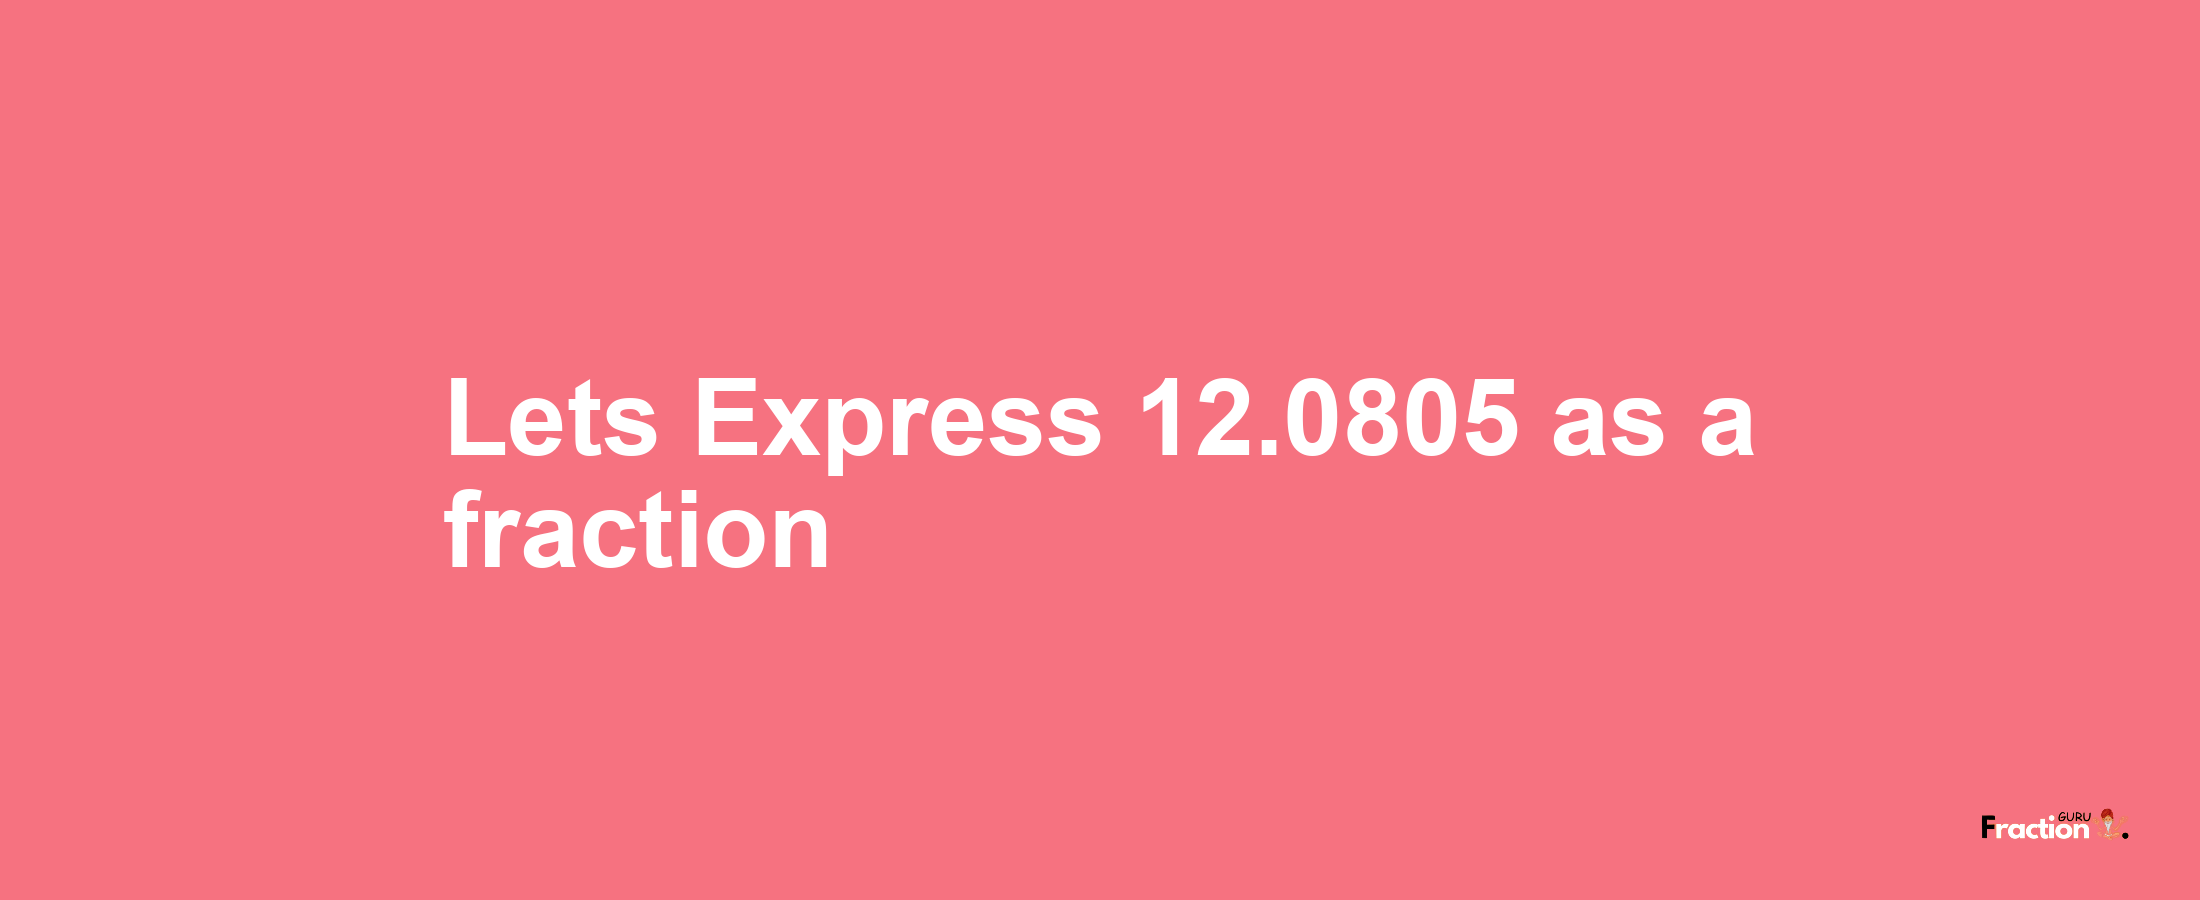 Lets Express 12.0805 as afraction